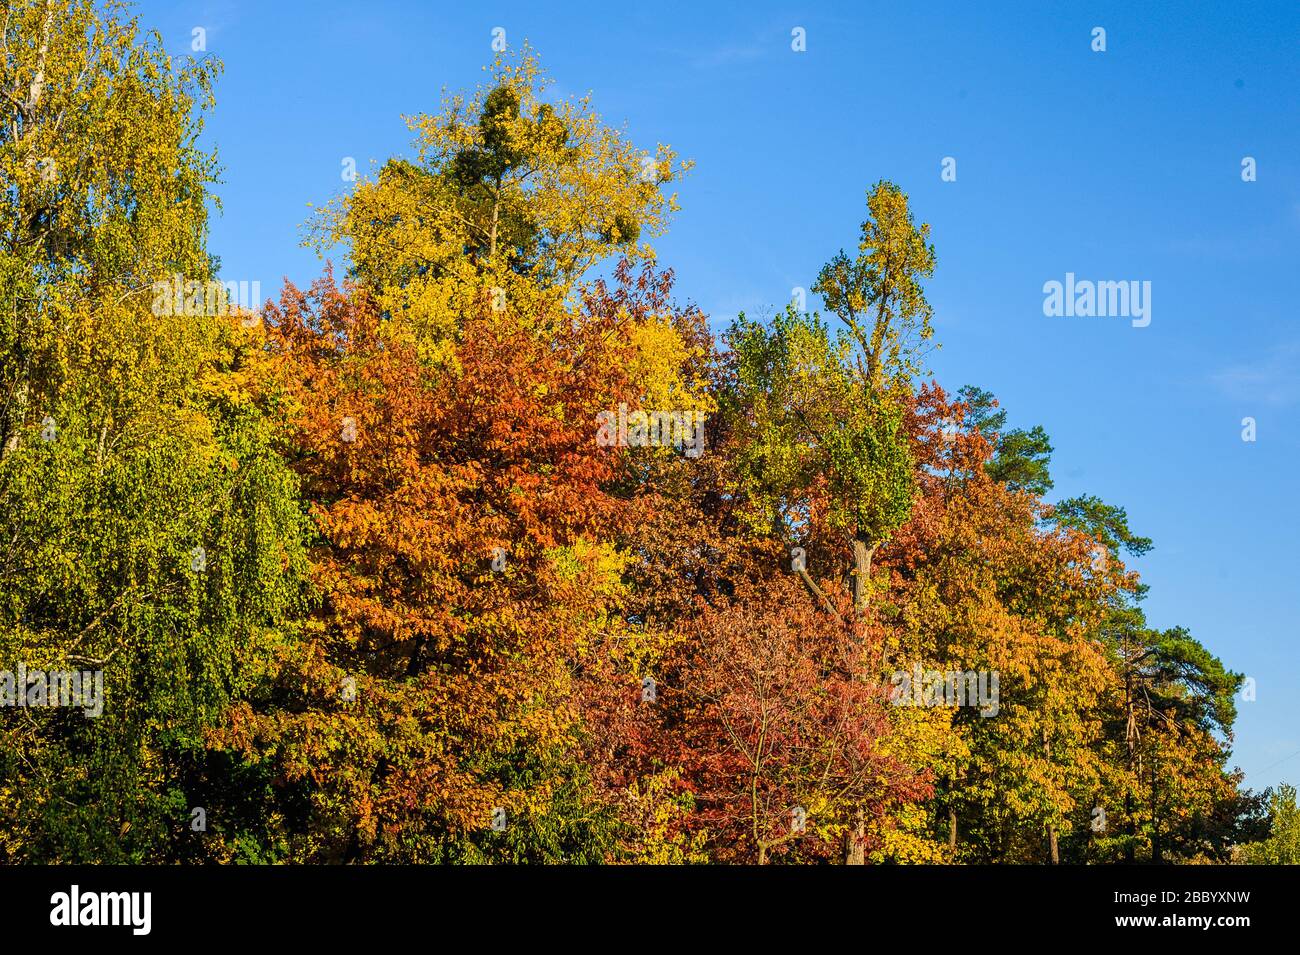 leaves on trees of yellow, red and green in the deciduous forest in autumn against a blue sky Stock Photo